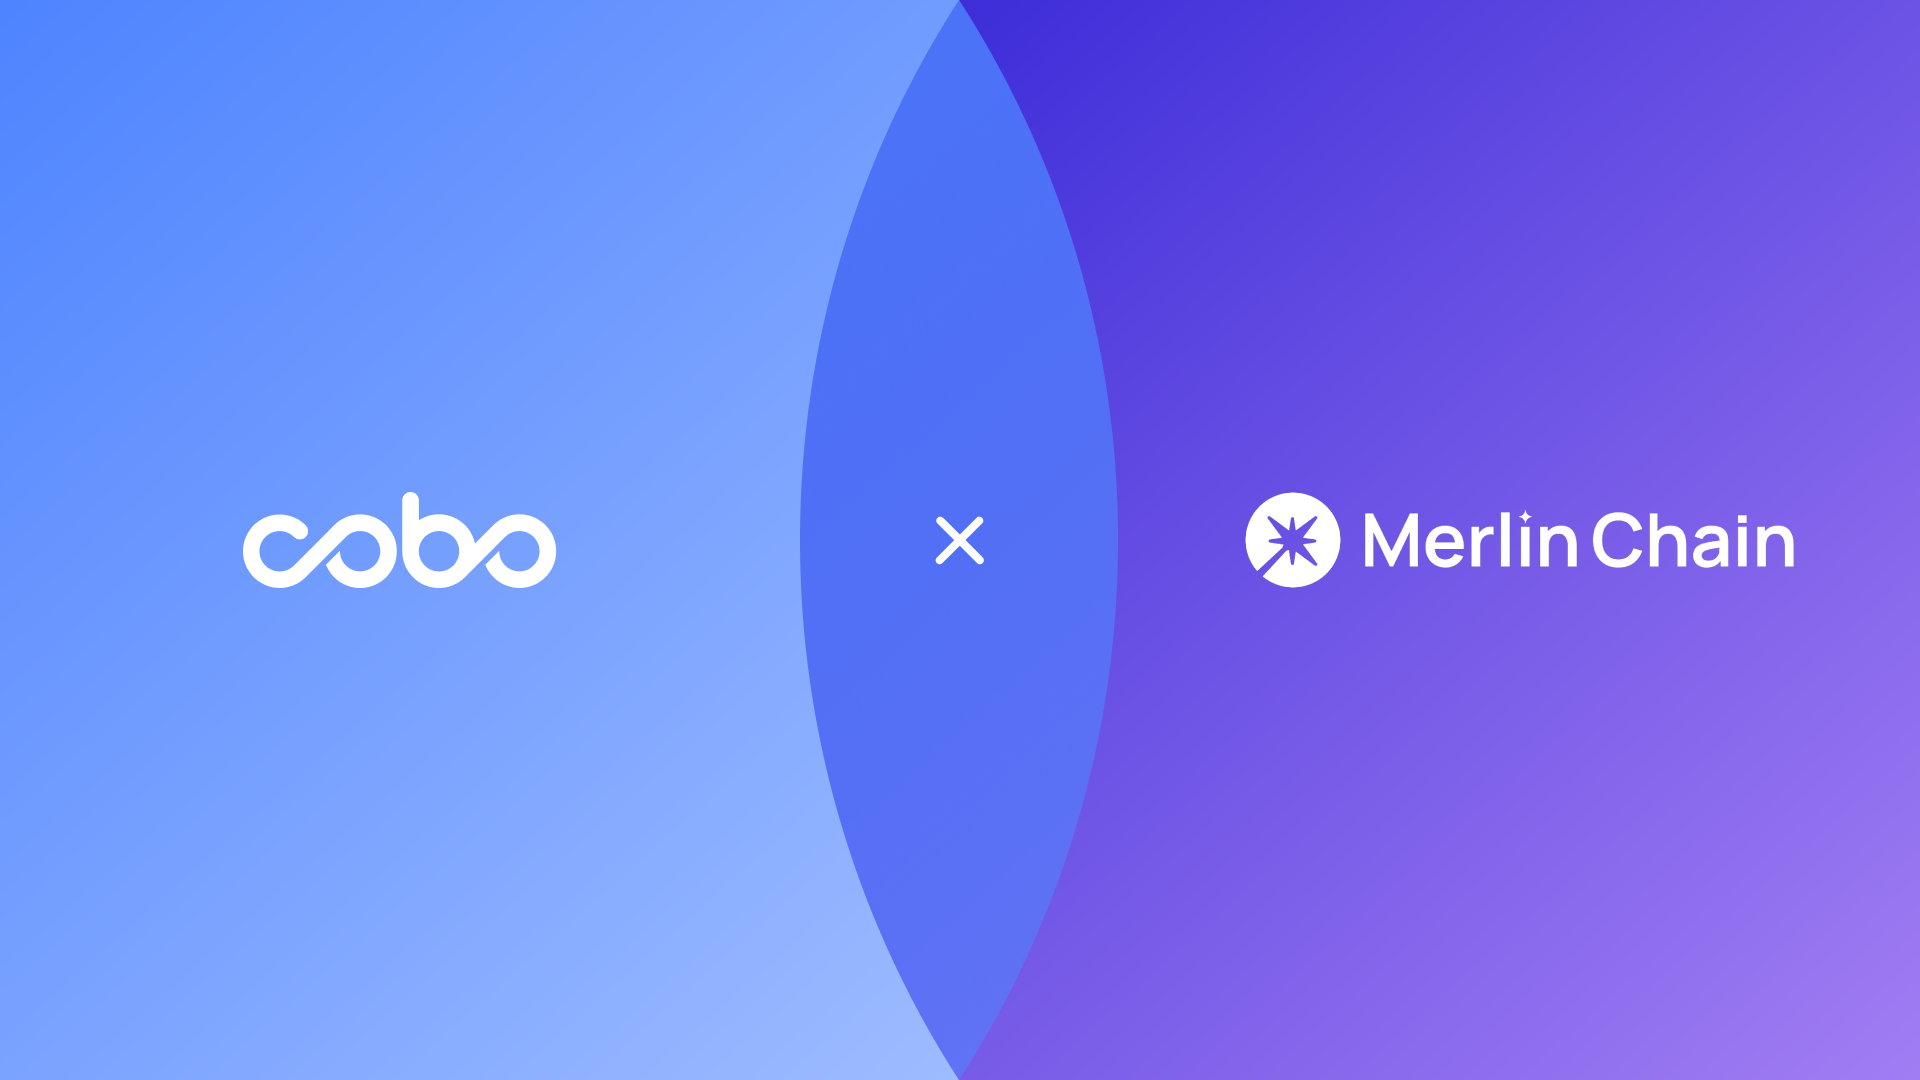 Cobo and Bitmap Tech Join Forces to Establish Merlin Chain, a Bitcoin Layer 2 Network with MPC Custody Technology